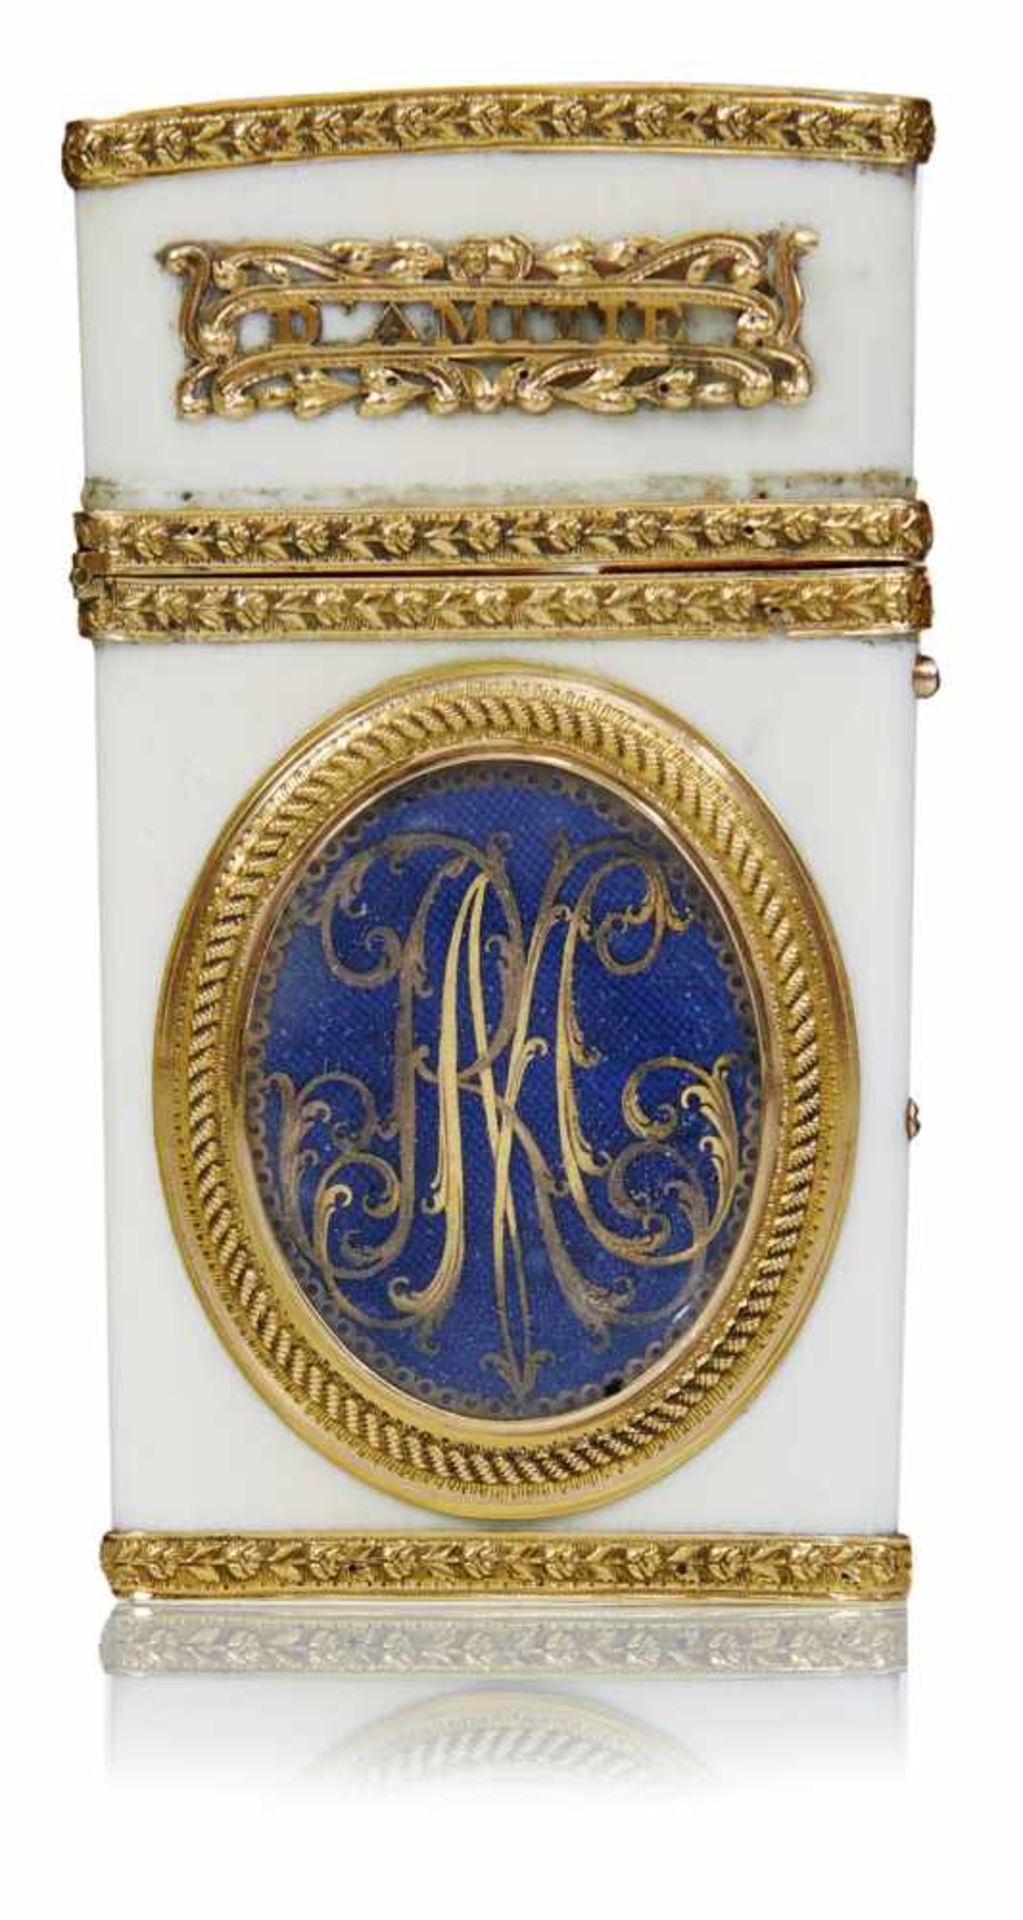 FINE GOLD MOUNTED IVORY CASE with a portrait miniature of a gentleman, gold monogram "RMC" on blue